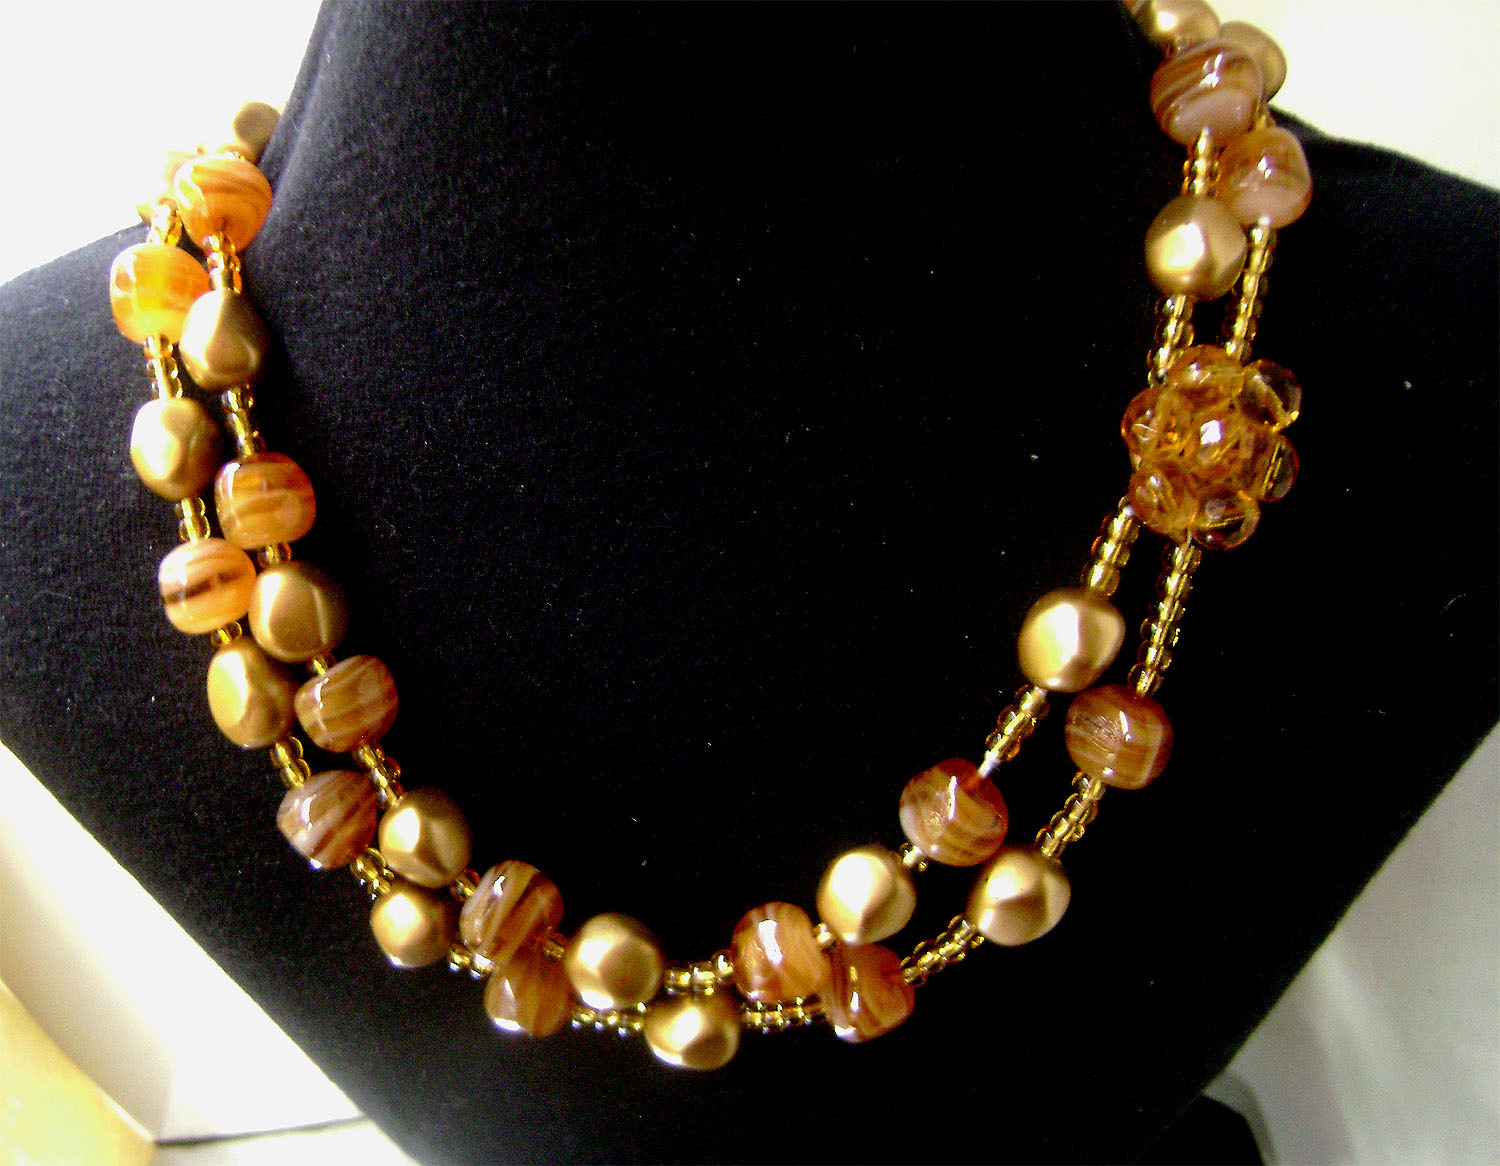 Vintage  2 Strand  Necklace Brown Peach Striped Agate Crystal Flower Clasp 70s - $39.00